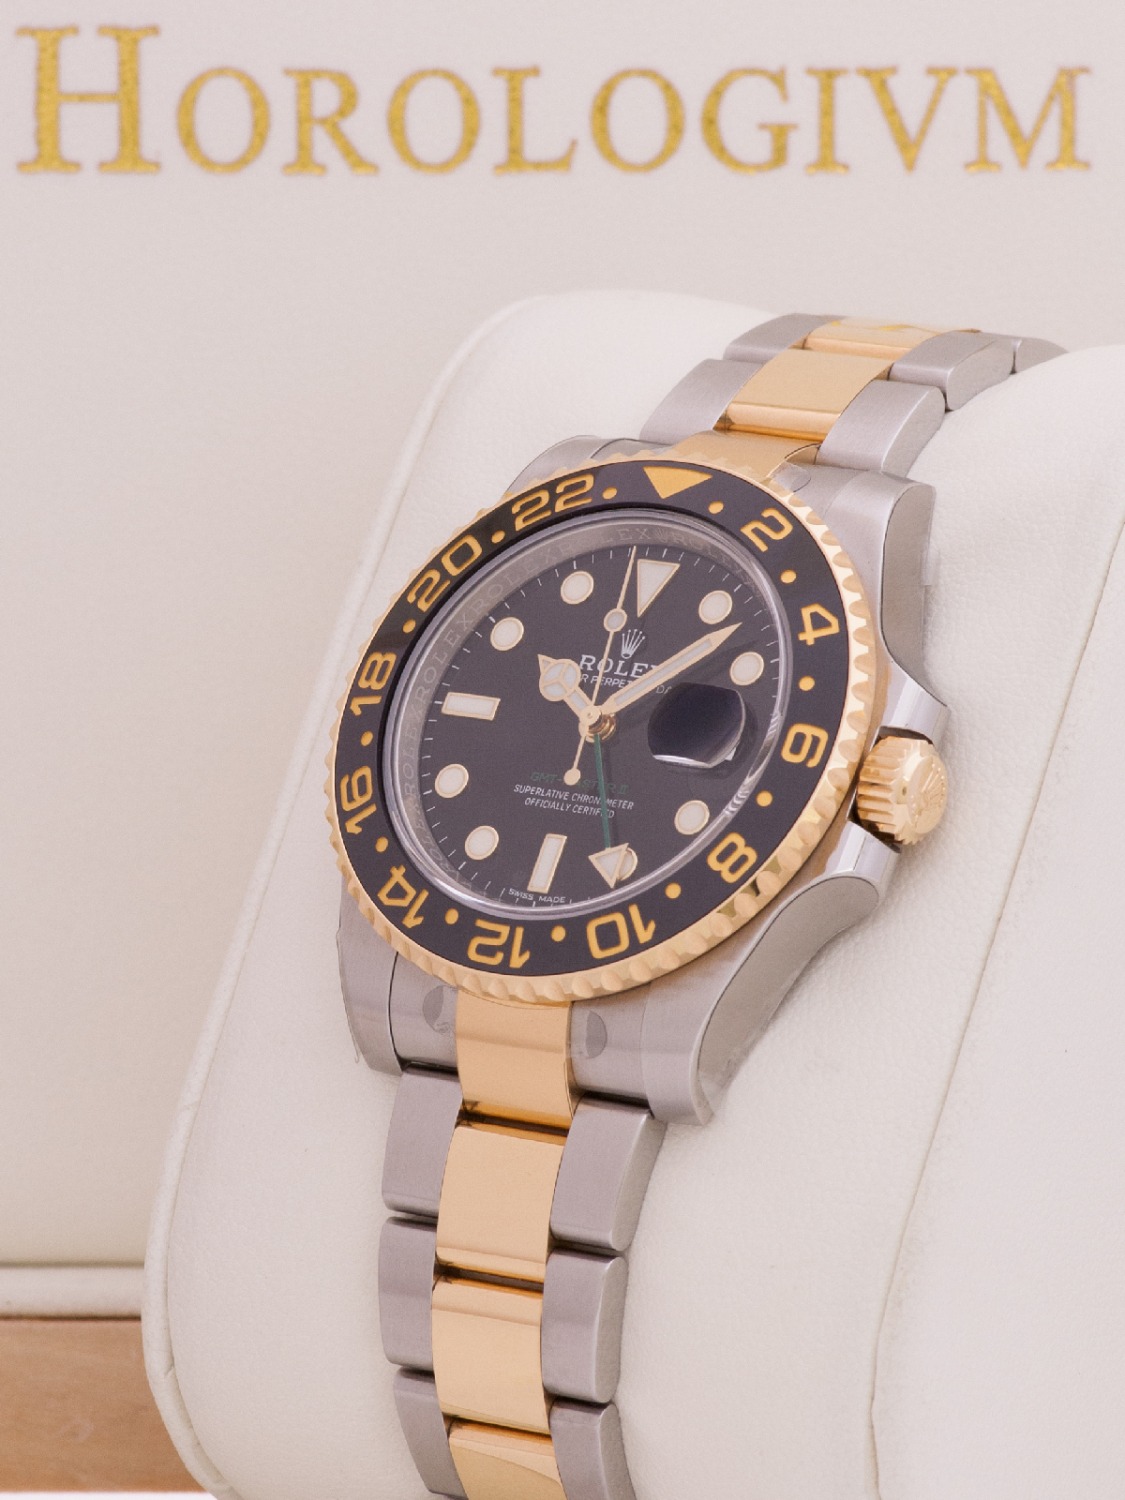 Rolex GMT Master II Ref. 116713LN watch, two tone (bi - colored) silver and yellow gold